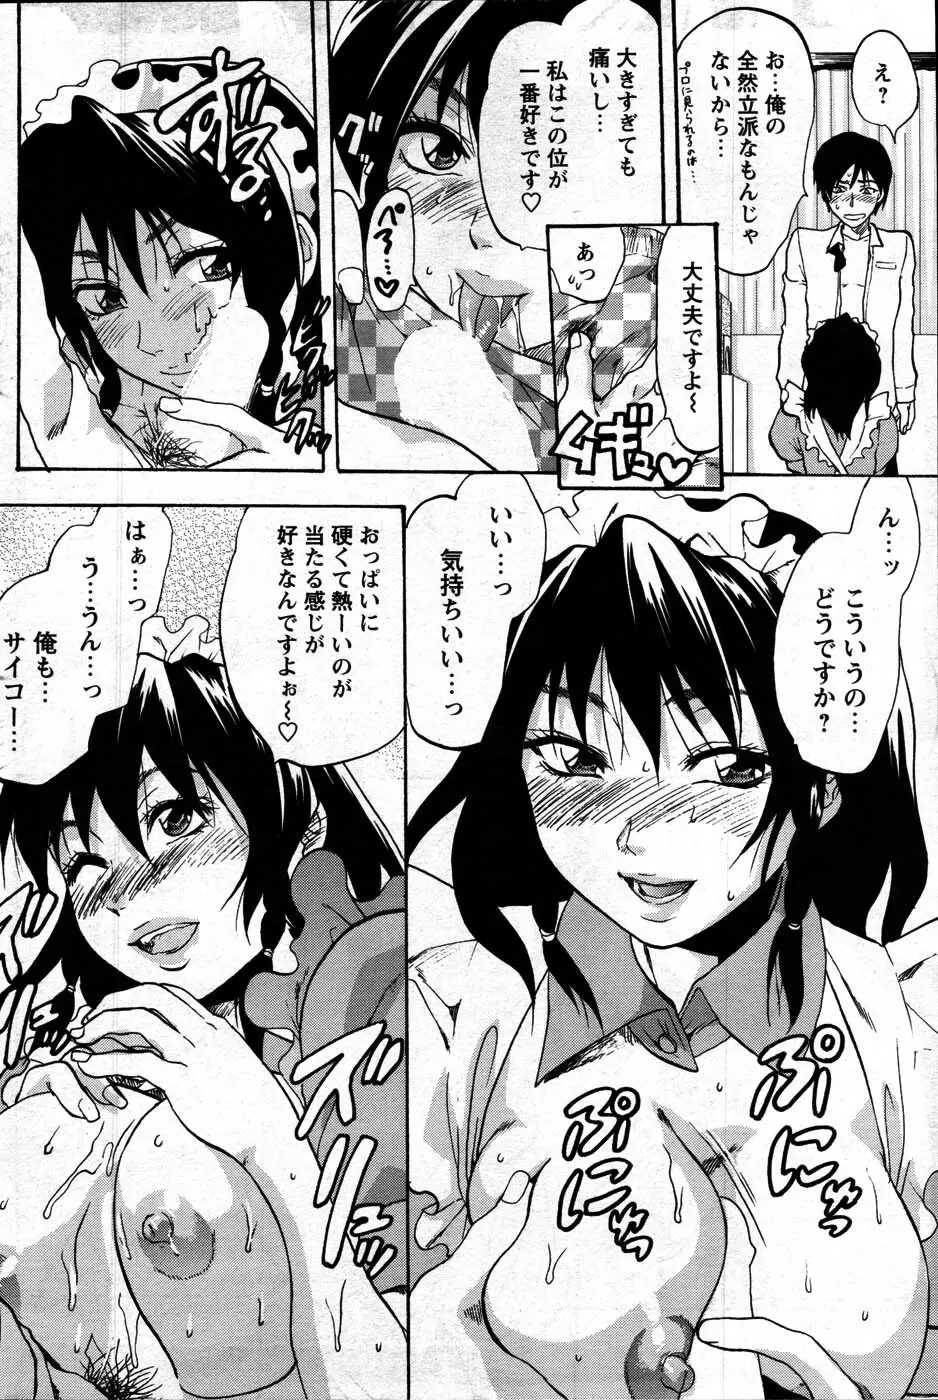 Comic Mens Young Special IKAZUCHI vol. 2 82ページ